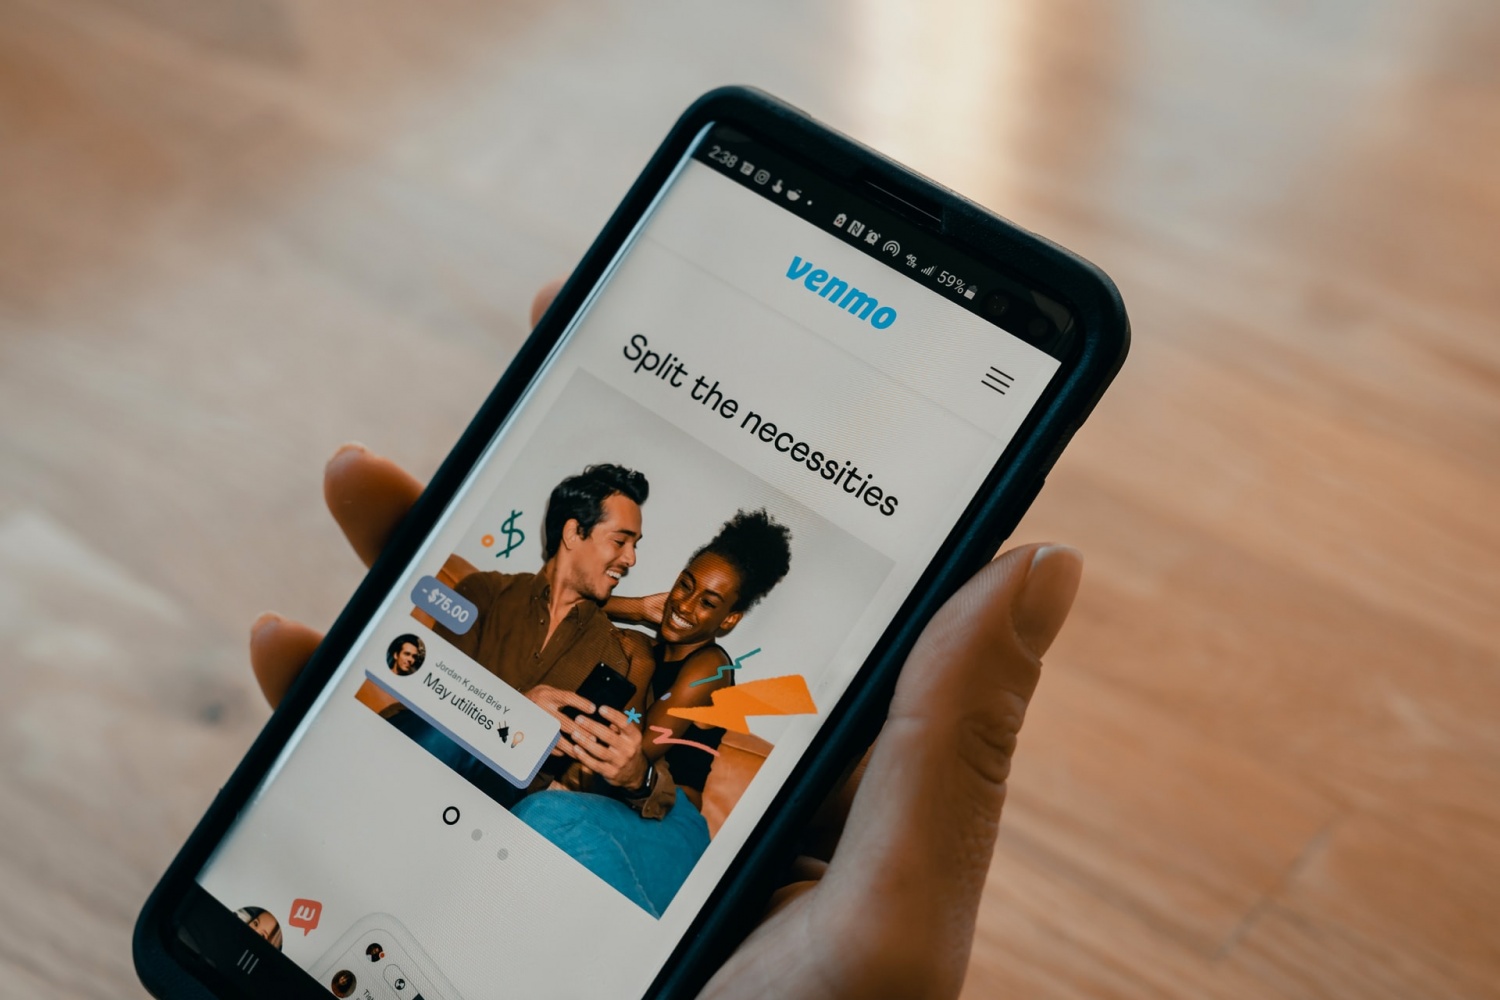 PayPal and Venmo Sees Transfer Fee Increase with a Minimum of $0.25 to $25 Max